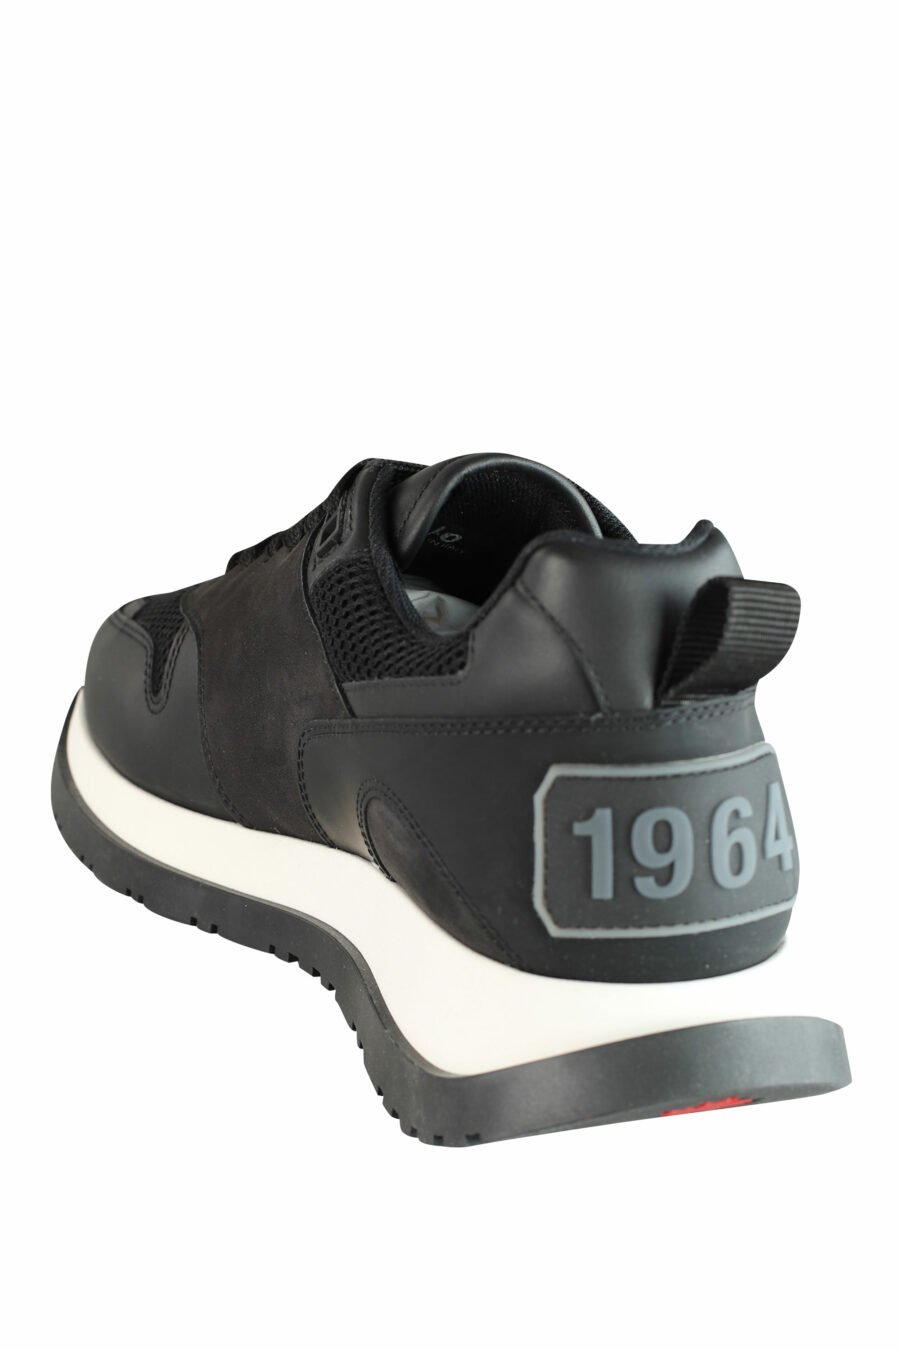 Black running shoes with white sole and black logo - IMG 1434